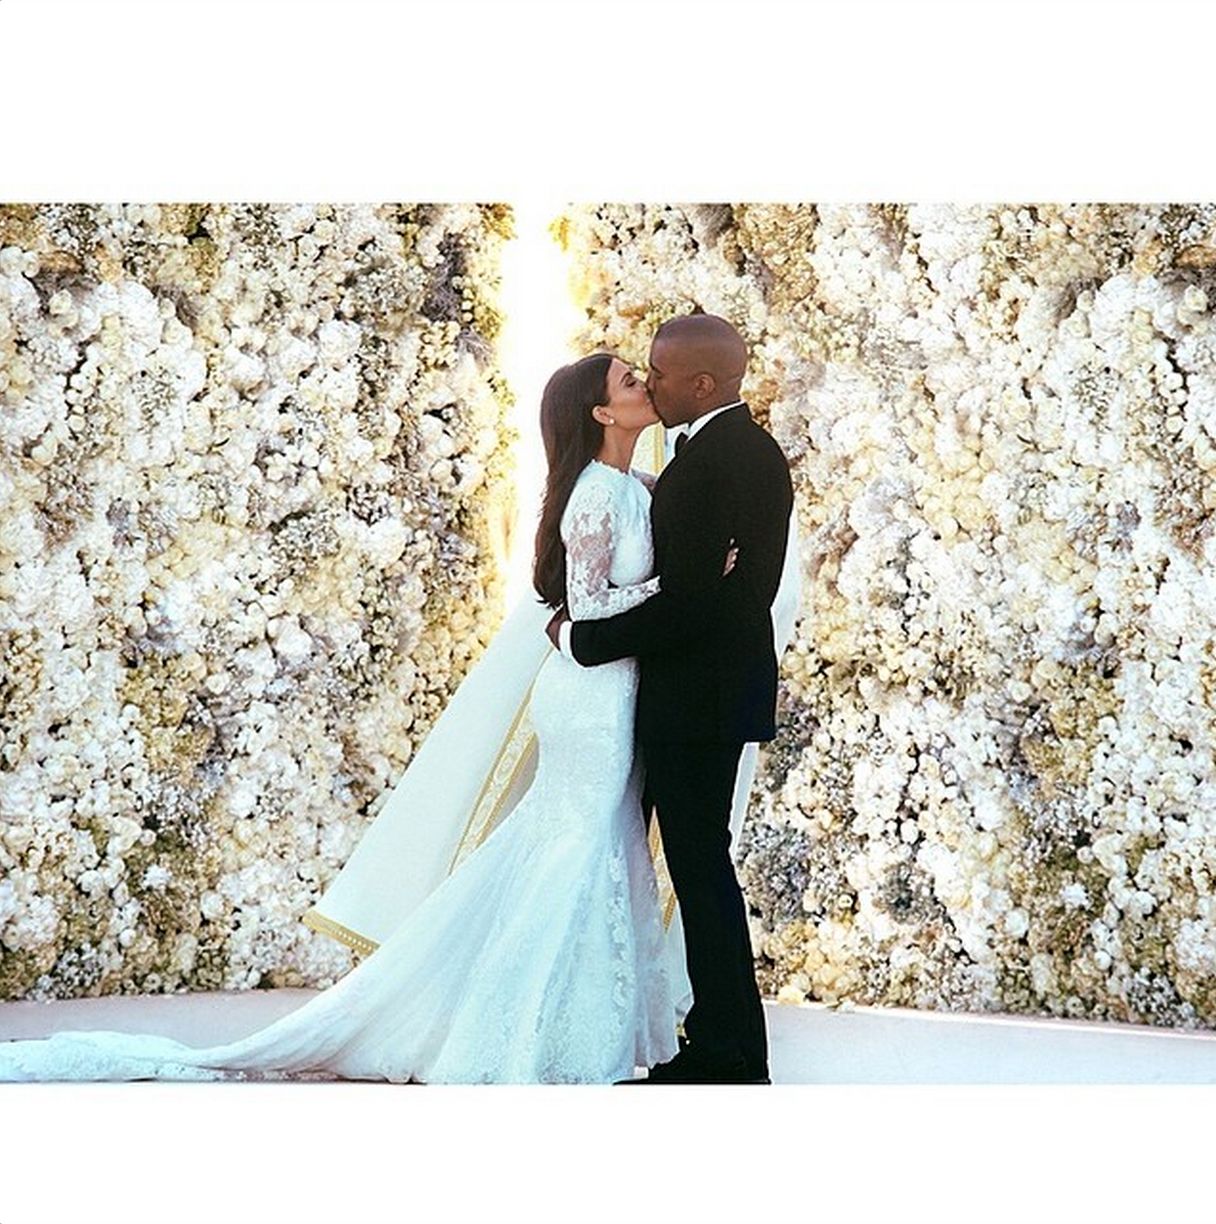 instagram looks back at 2014 you ll never guess which kiss got a whopping 2 4 million likes image 4